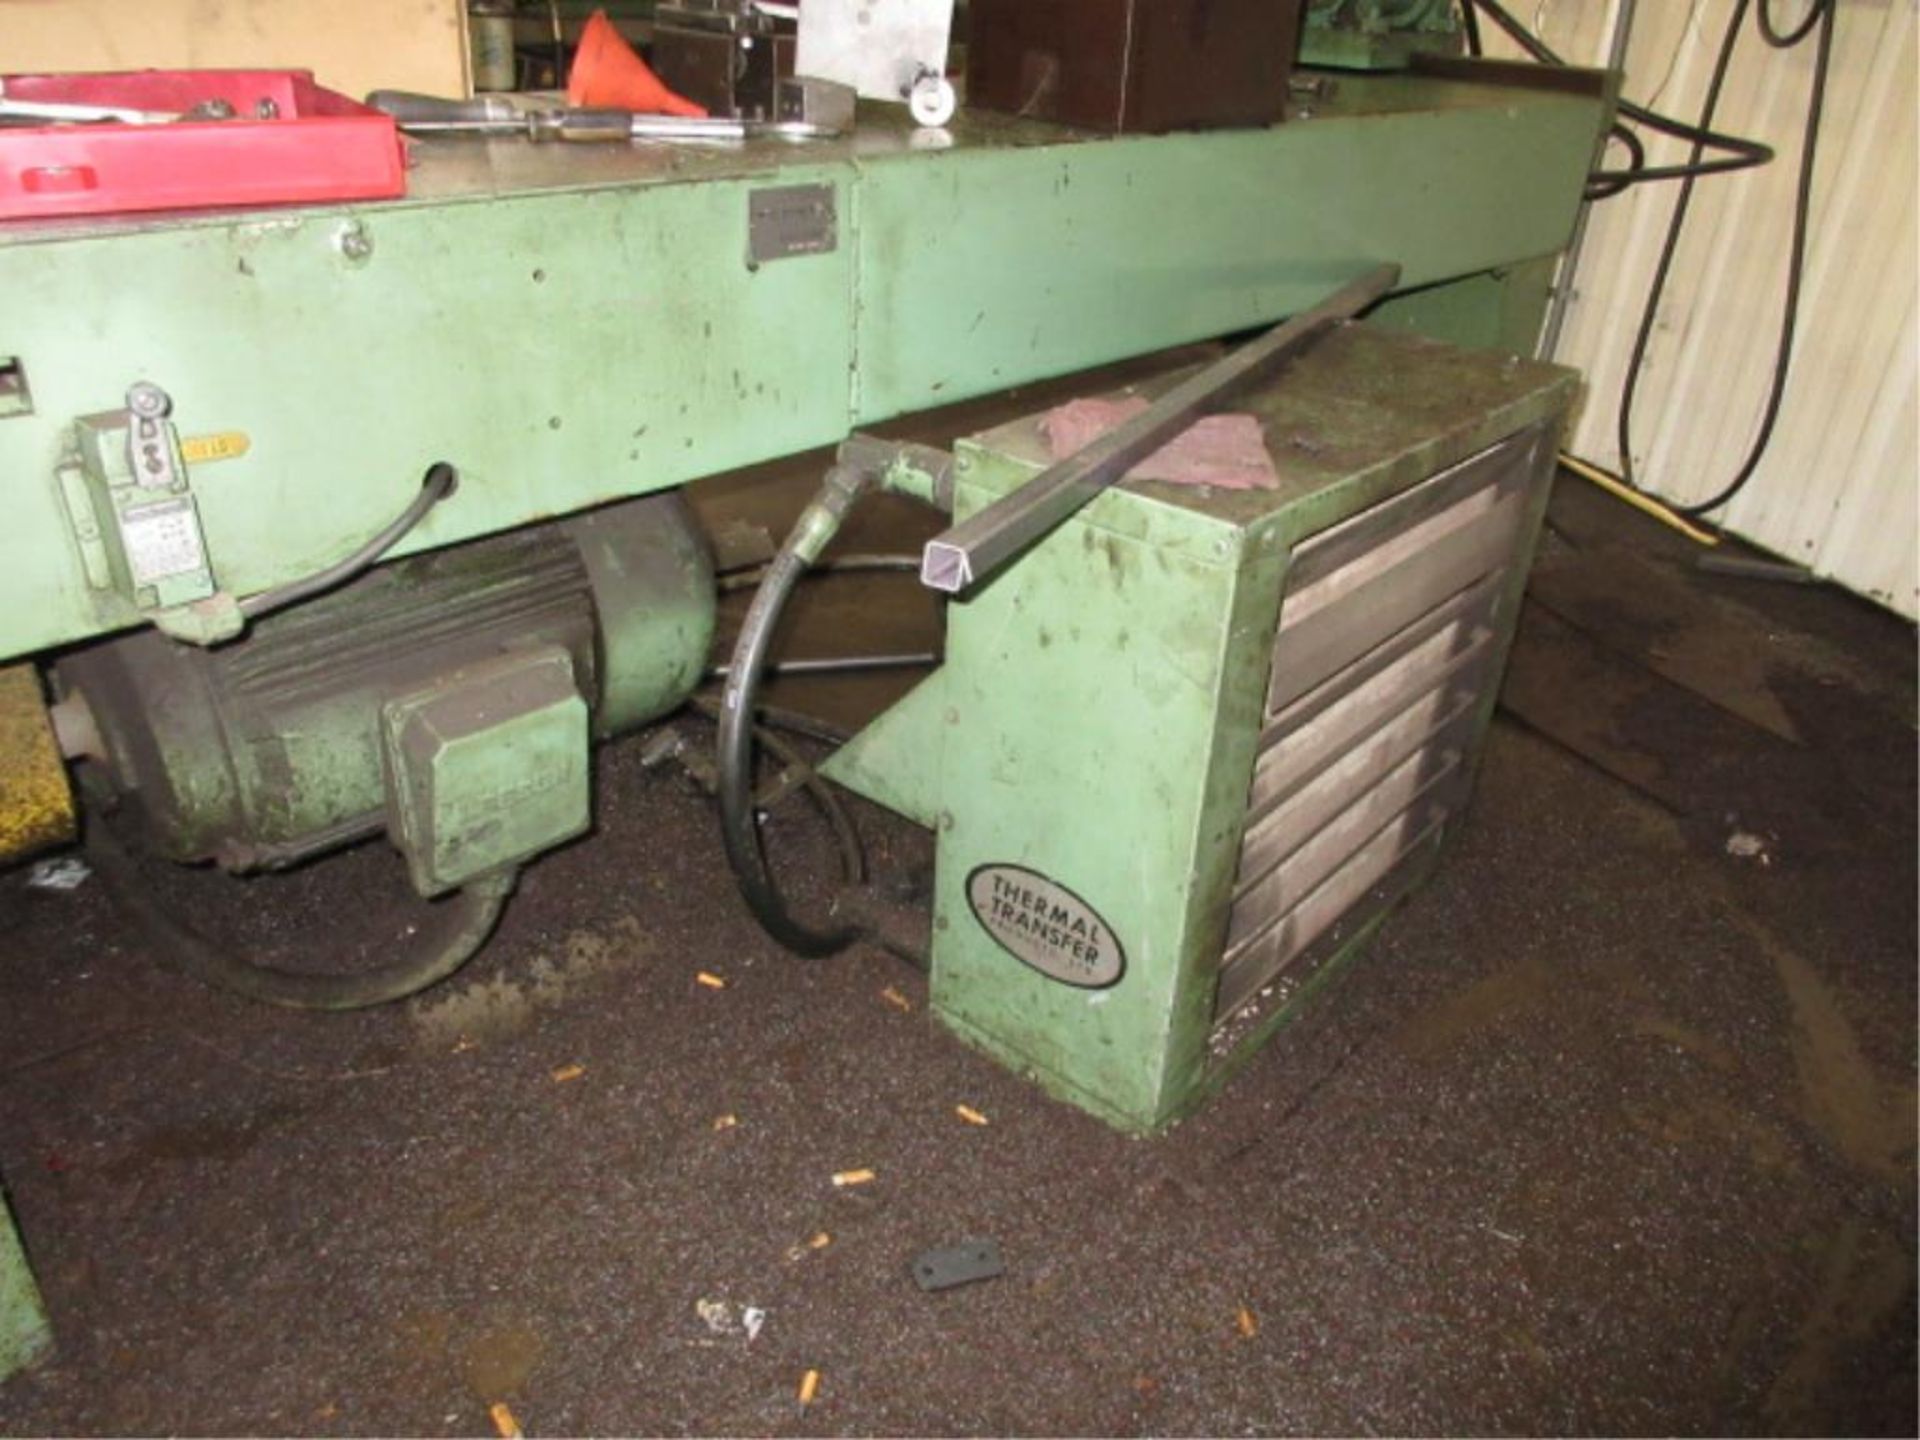 Pines Hydraulic Bender. Pines No. 2 Hydraulic Bender, programmable control with stand, tooling not - Image 7 of 9